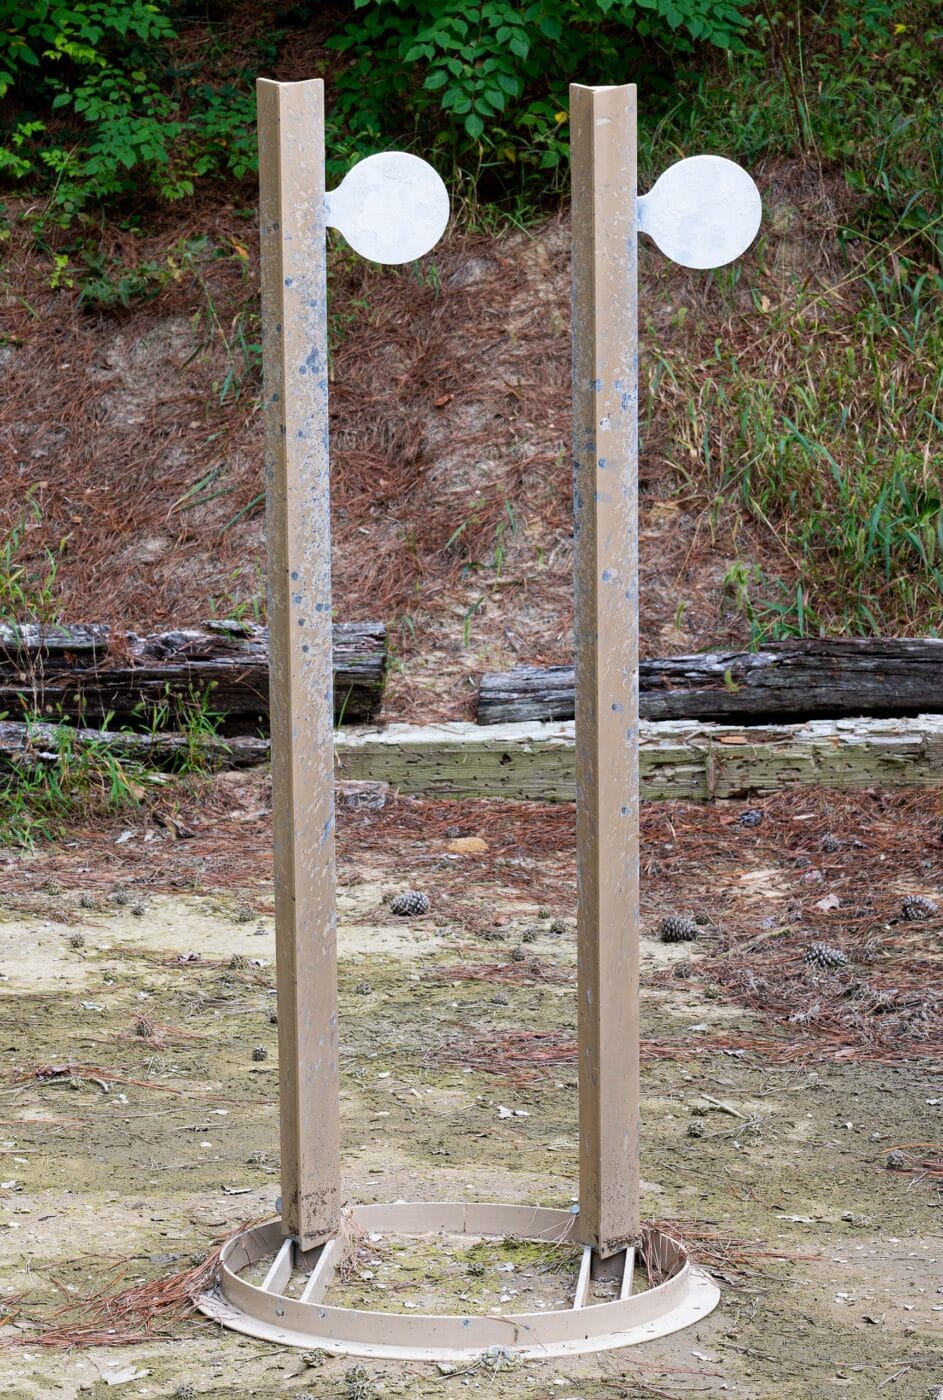 Dueling steel targets as tested during review